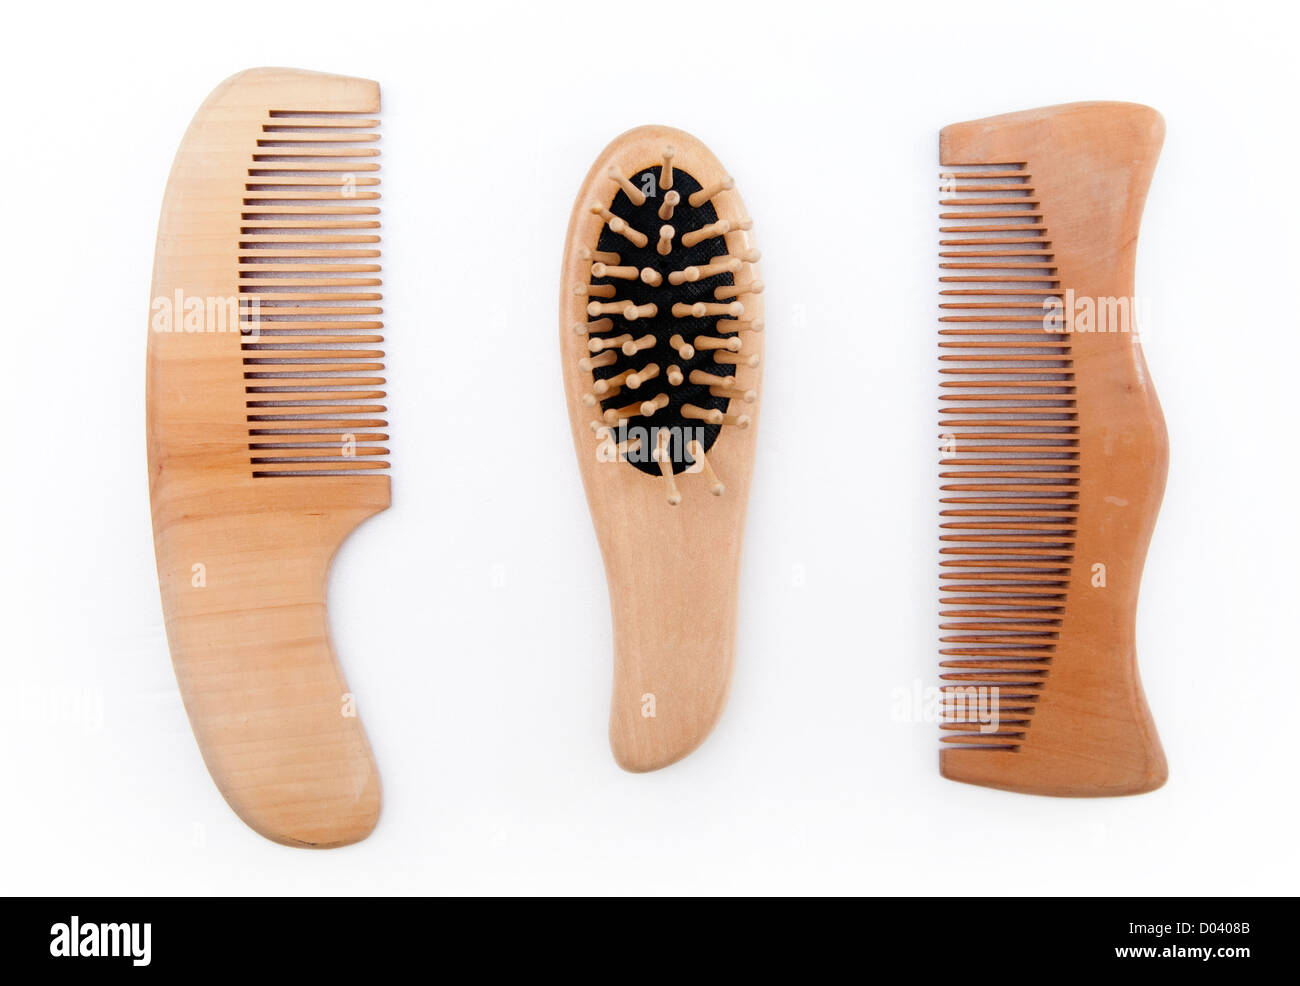 Wooden comb for hair on plain background. Stock Photo